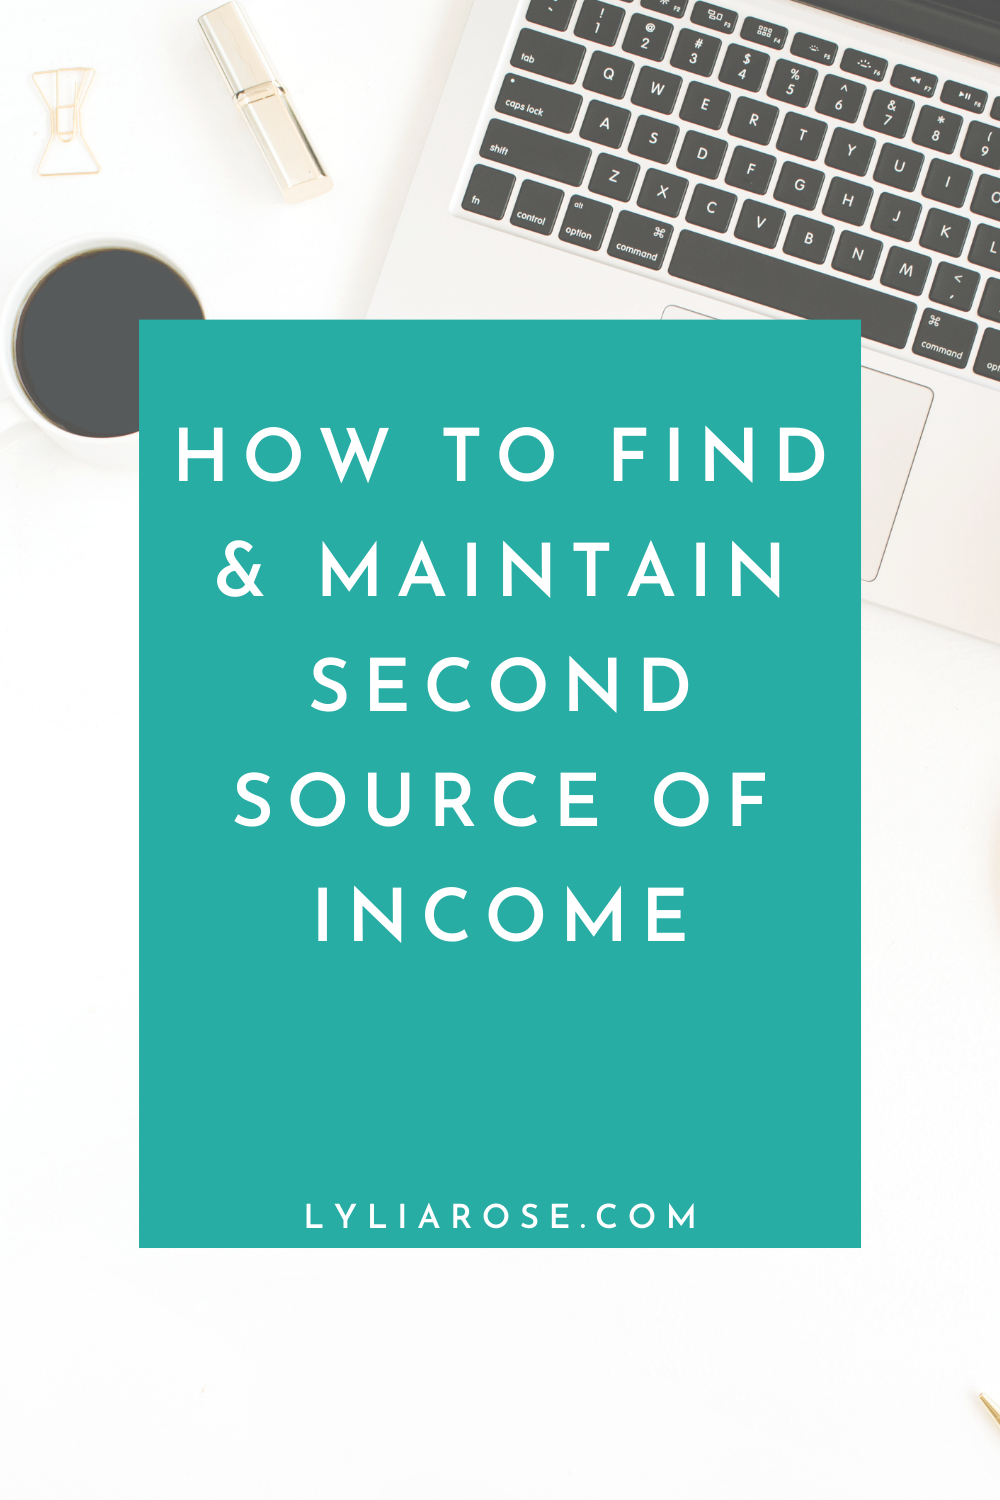 How to find and maintain second source of income